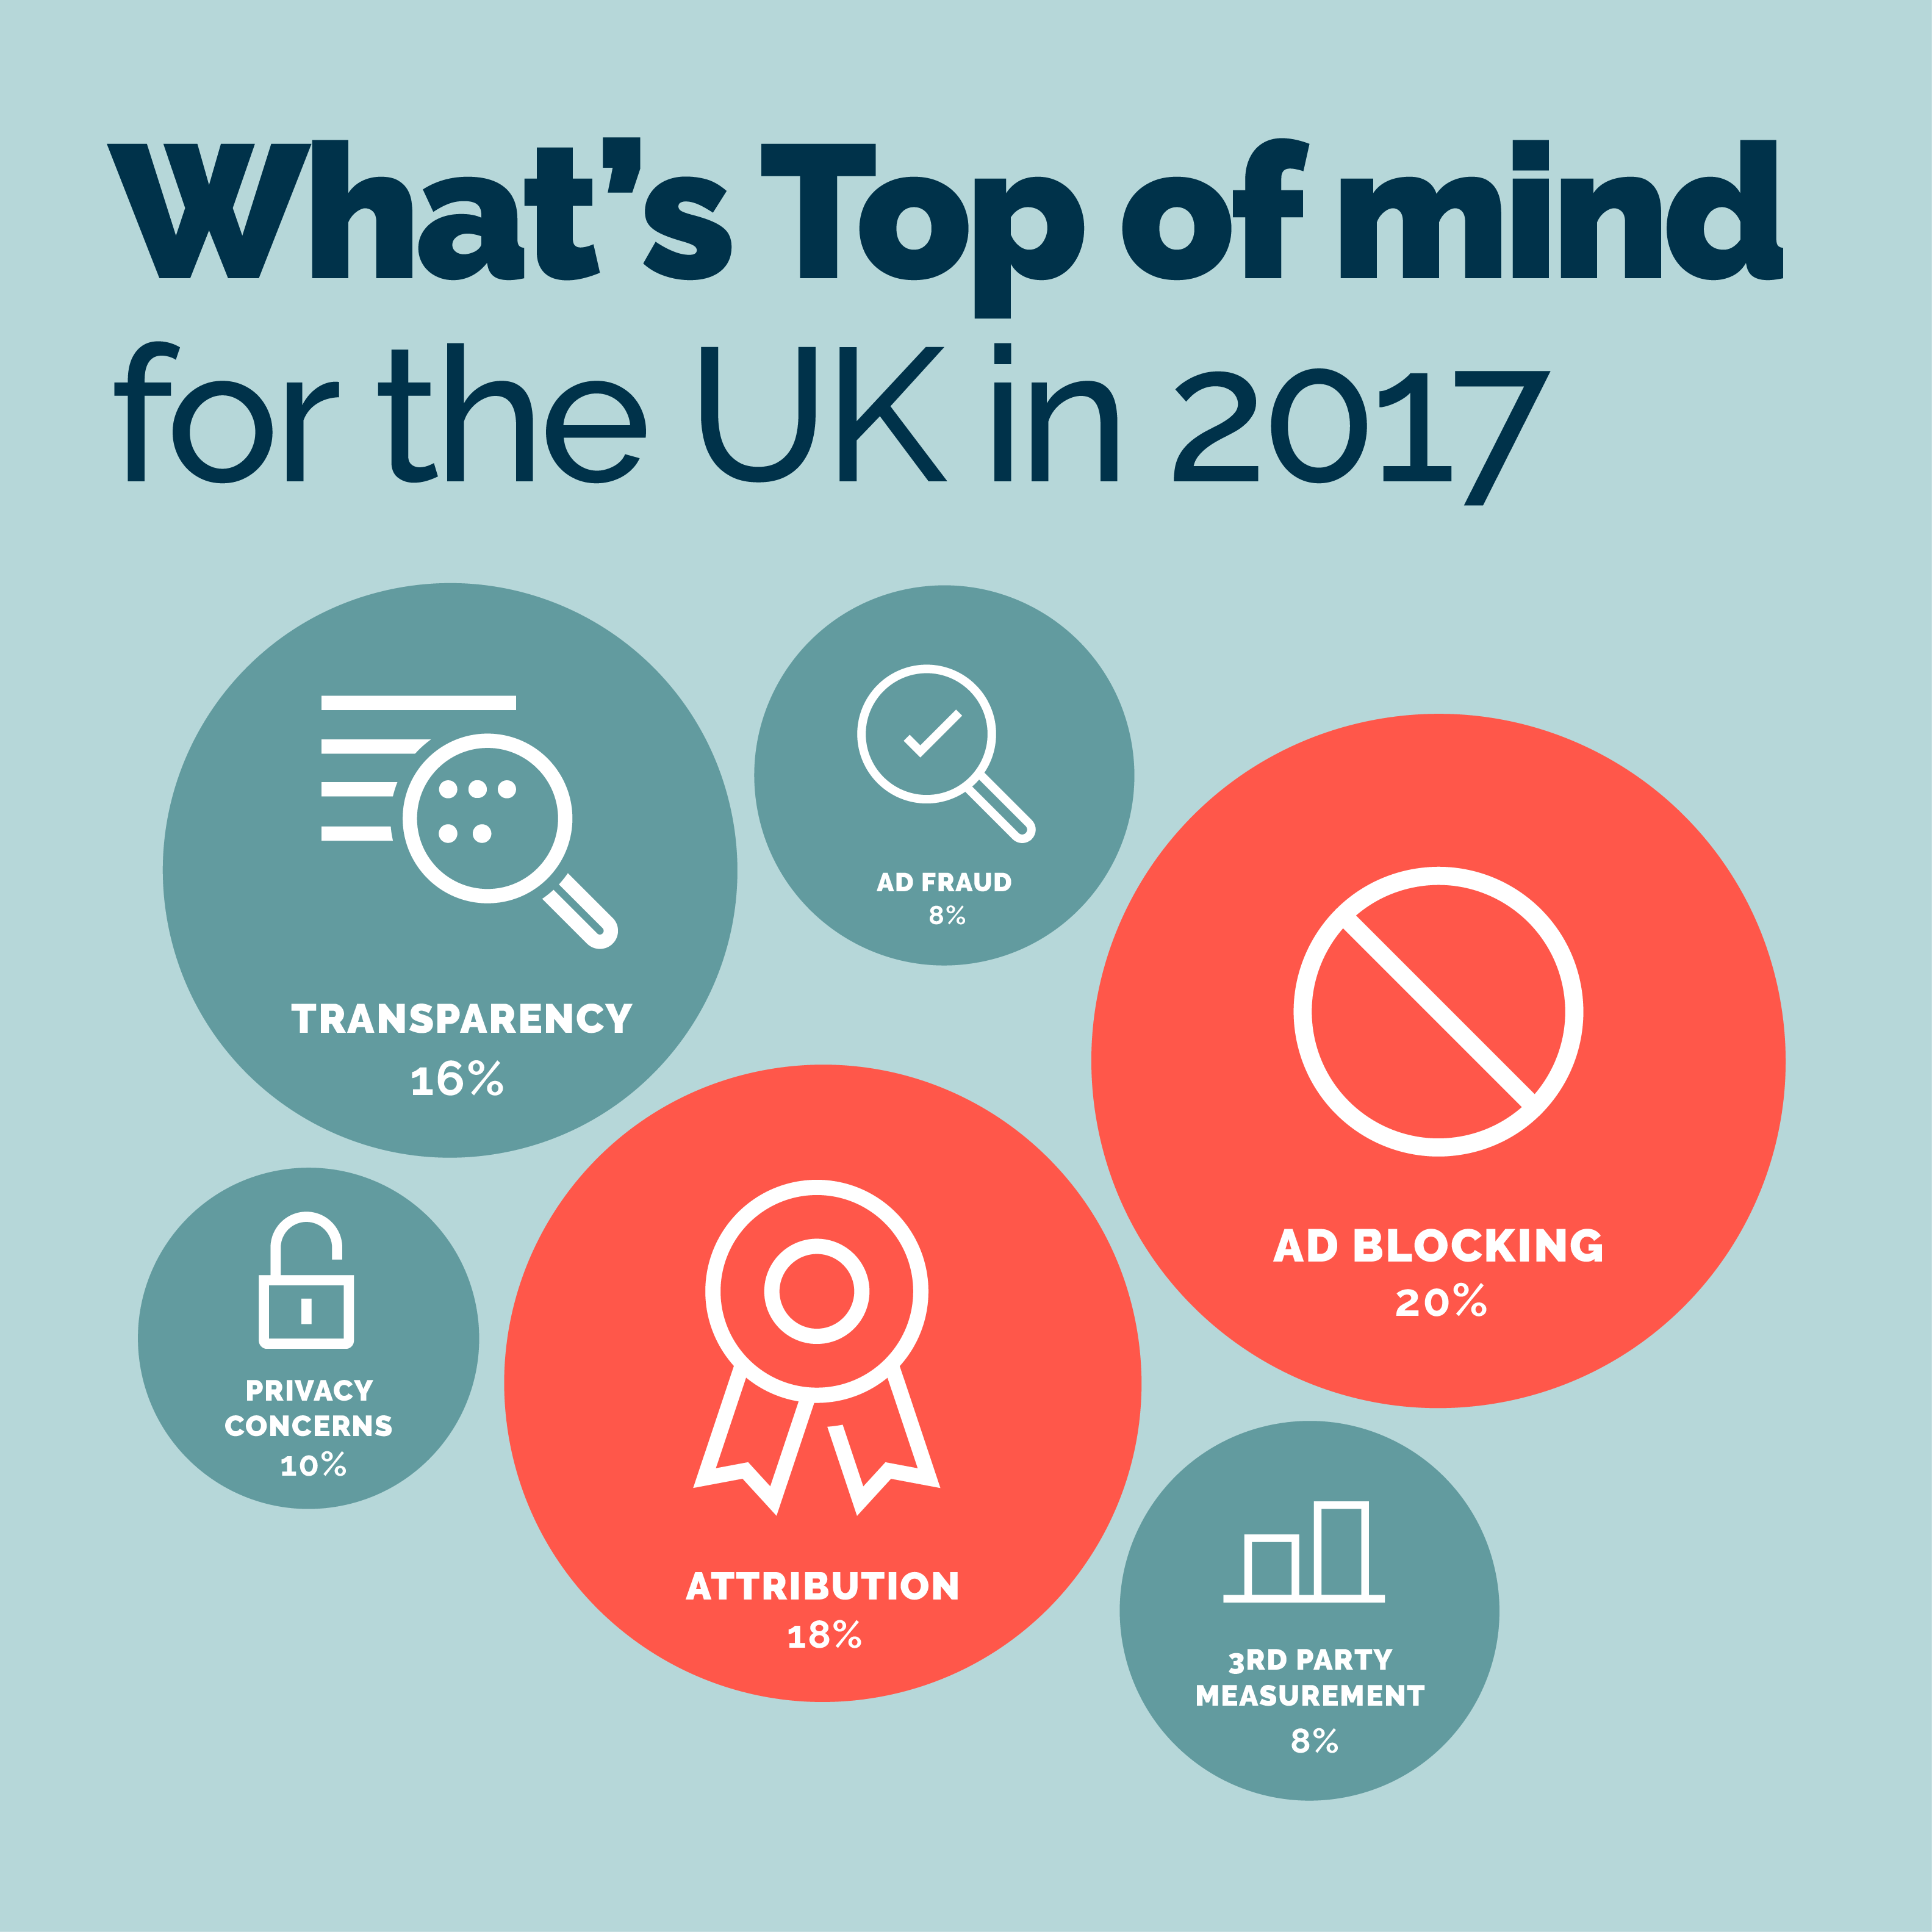 What’s top of mind for the UK in 2017?